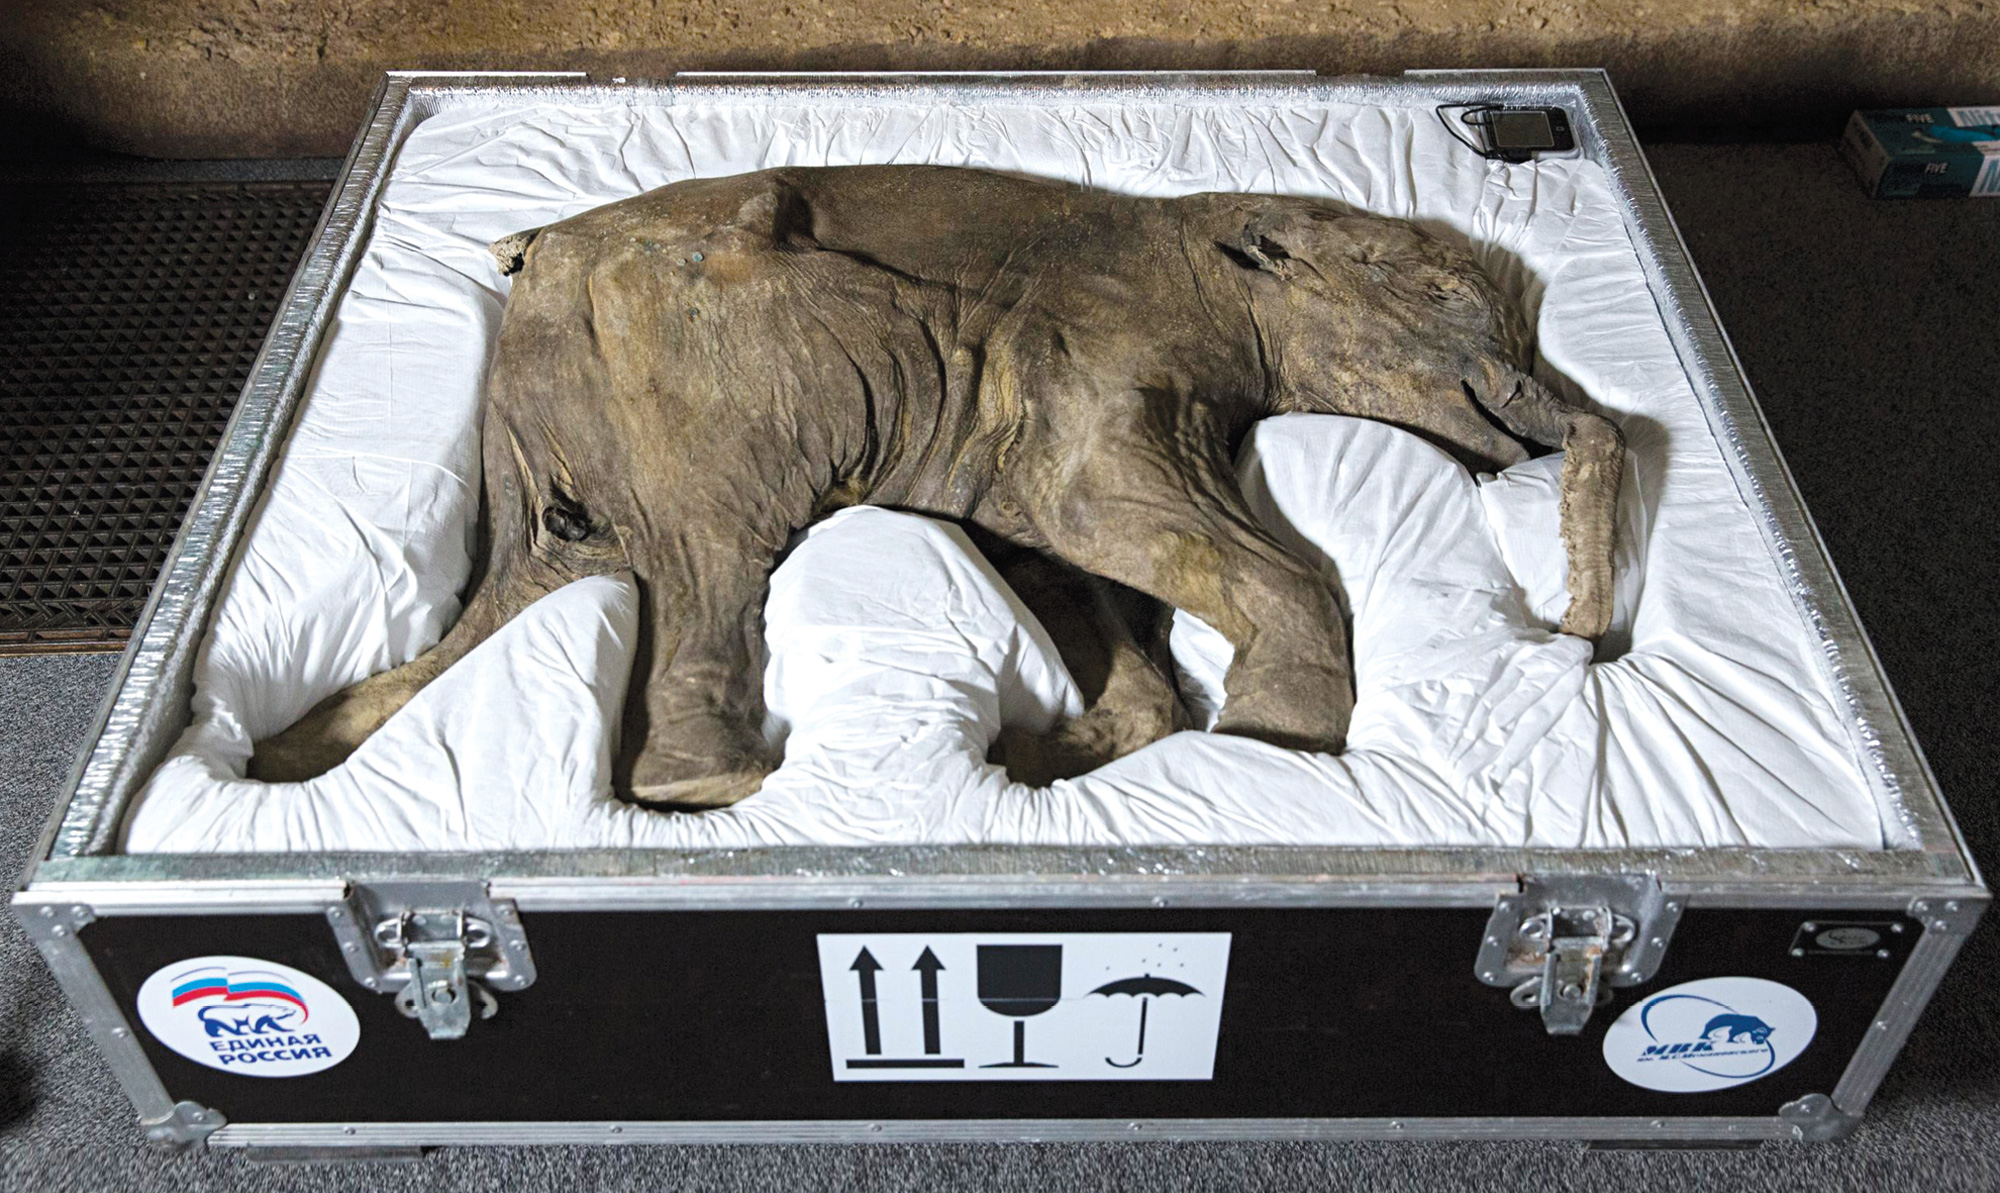 A photograph of Lyuba, the world’s most complete mammoth specimen, which drowned in a mudhole during the late Pleistocene ice age. She was discovered in two thousand and six by Yuri Khudi, a reindeer herder from Russia’s autonomous Yamal-Nenets region, who named her after his wife. Usually housed in Siberia's Shemanovsky Museum, she was shipped to London’s Natural History Museum for an exhibition in twenty fourteen. Here she is in the wooden crate purpose-built for the journey—as gently cradled by the cloth and form-fitting foam as by the mud that preserved her for forty-two thousand years.